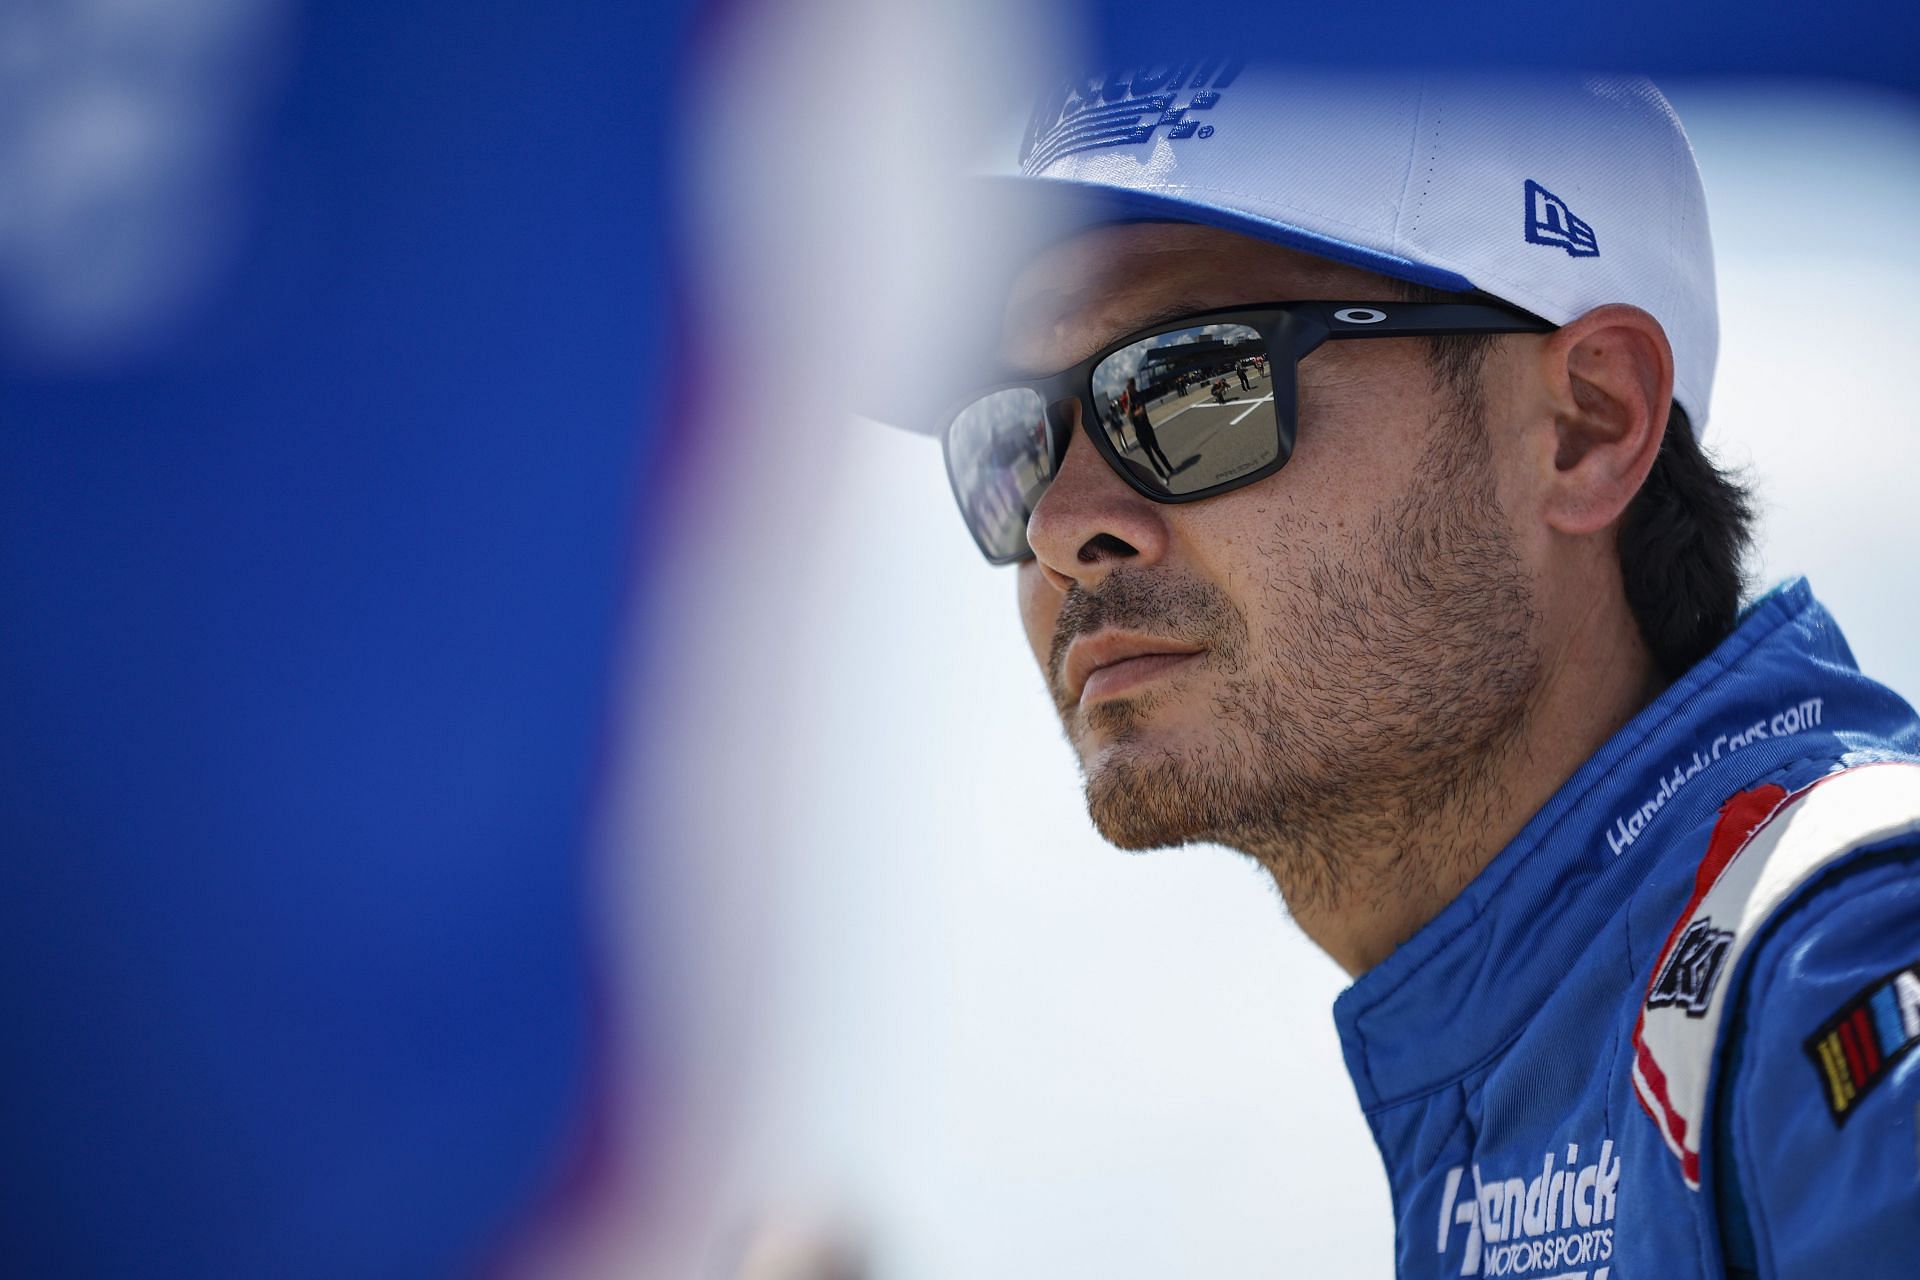 Kyle Larson looks on during practice for the 2022 NASCAR Cup Series FireKeepers Casino 400 at Michigan International Speedway in Brooklyn, Michigan (Photo by Sean Gardner/Getty Images)